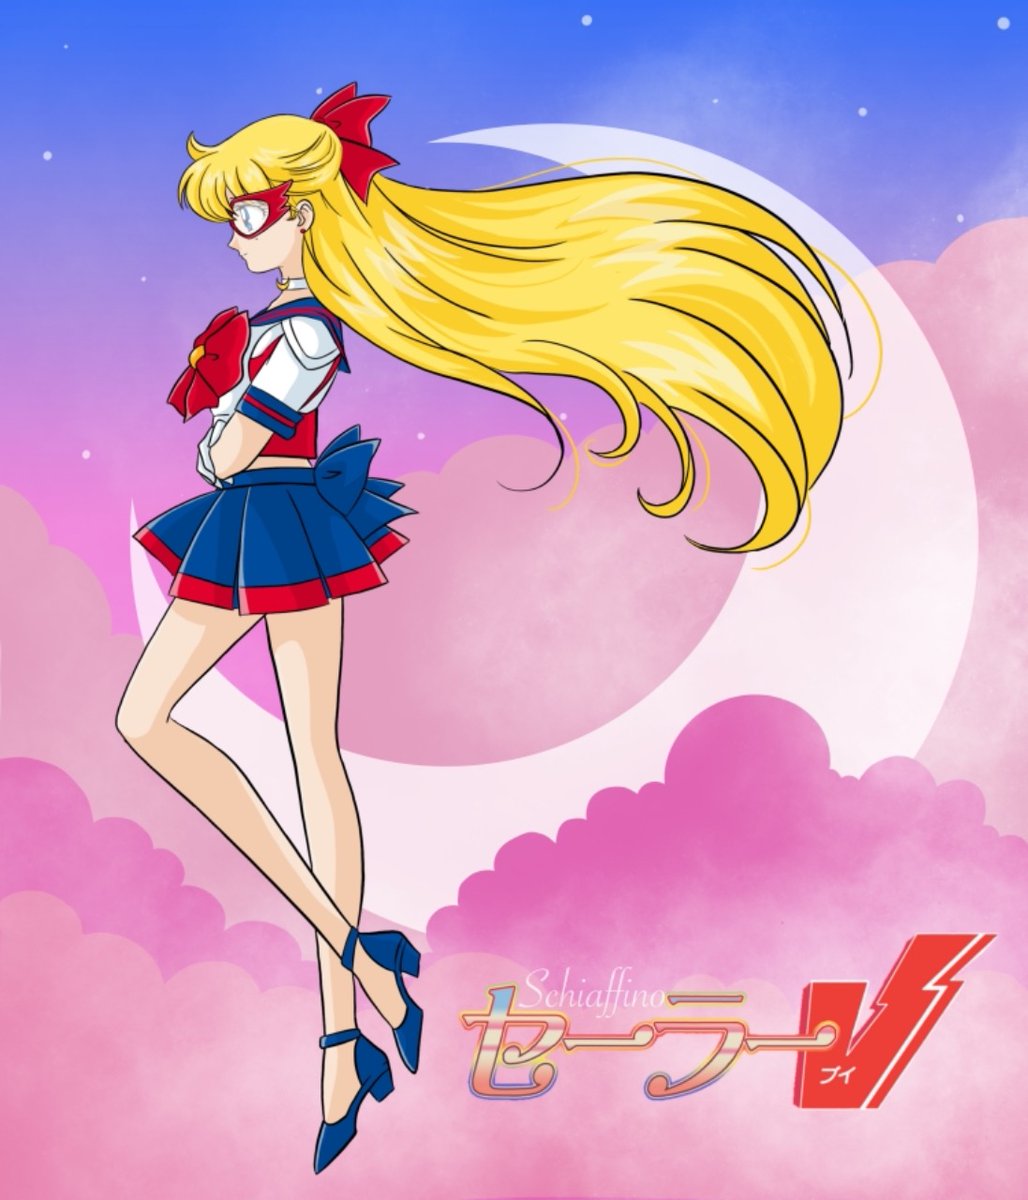 On the classic anime of SAILOR MOON:
There's a poster of Sailor V on the back in one of the episodes, today there's a tribute to that moment.

#美少女戦士セーラームーン #90sanime #sailormoon #bishojosenshisailormoon #sailorvenus #sailorv #codenamesailorv #animegirl #animeart